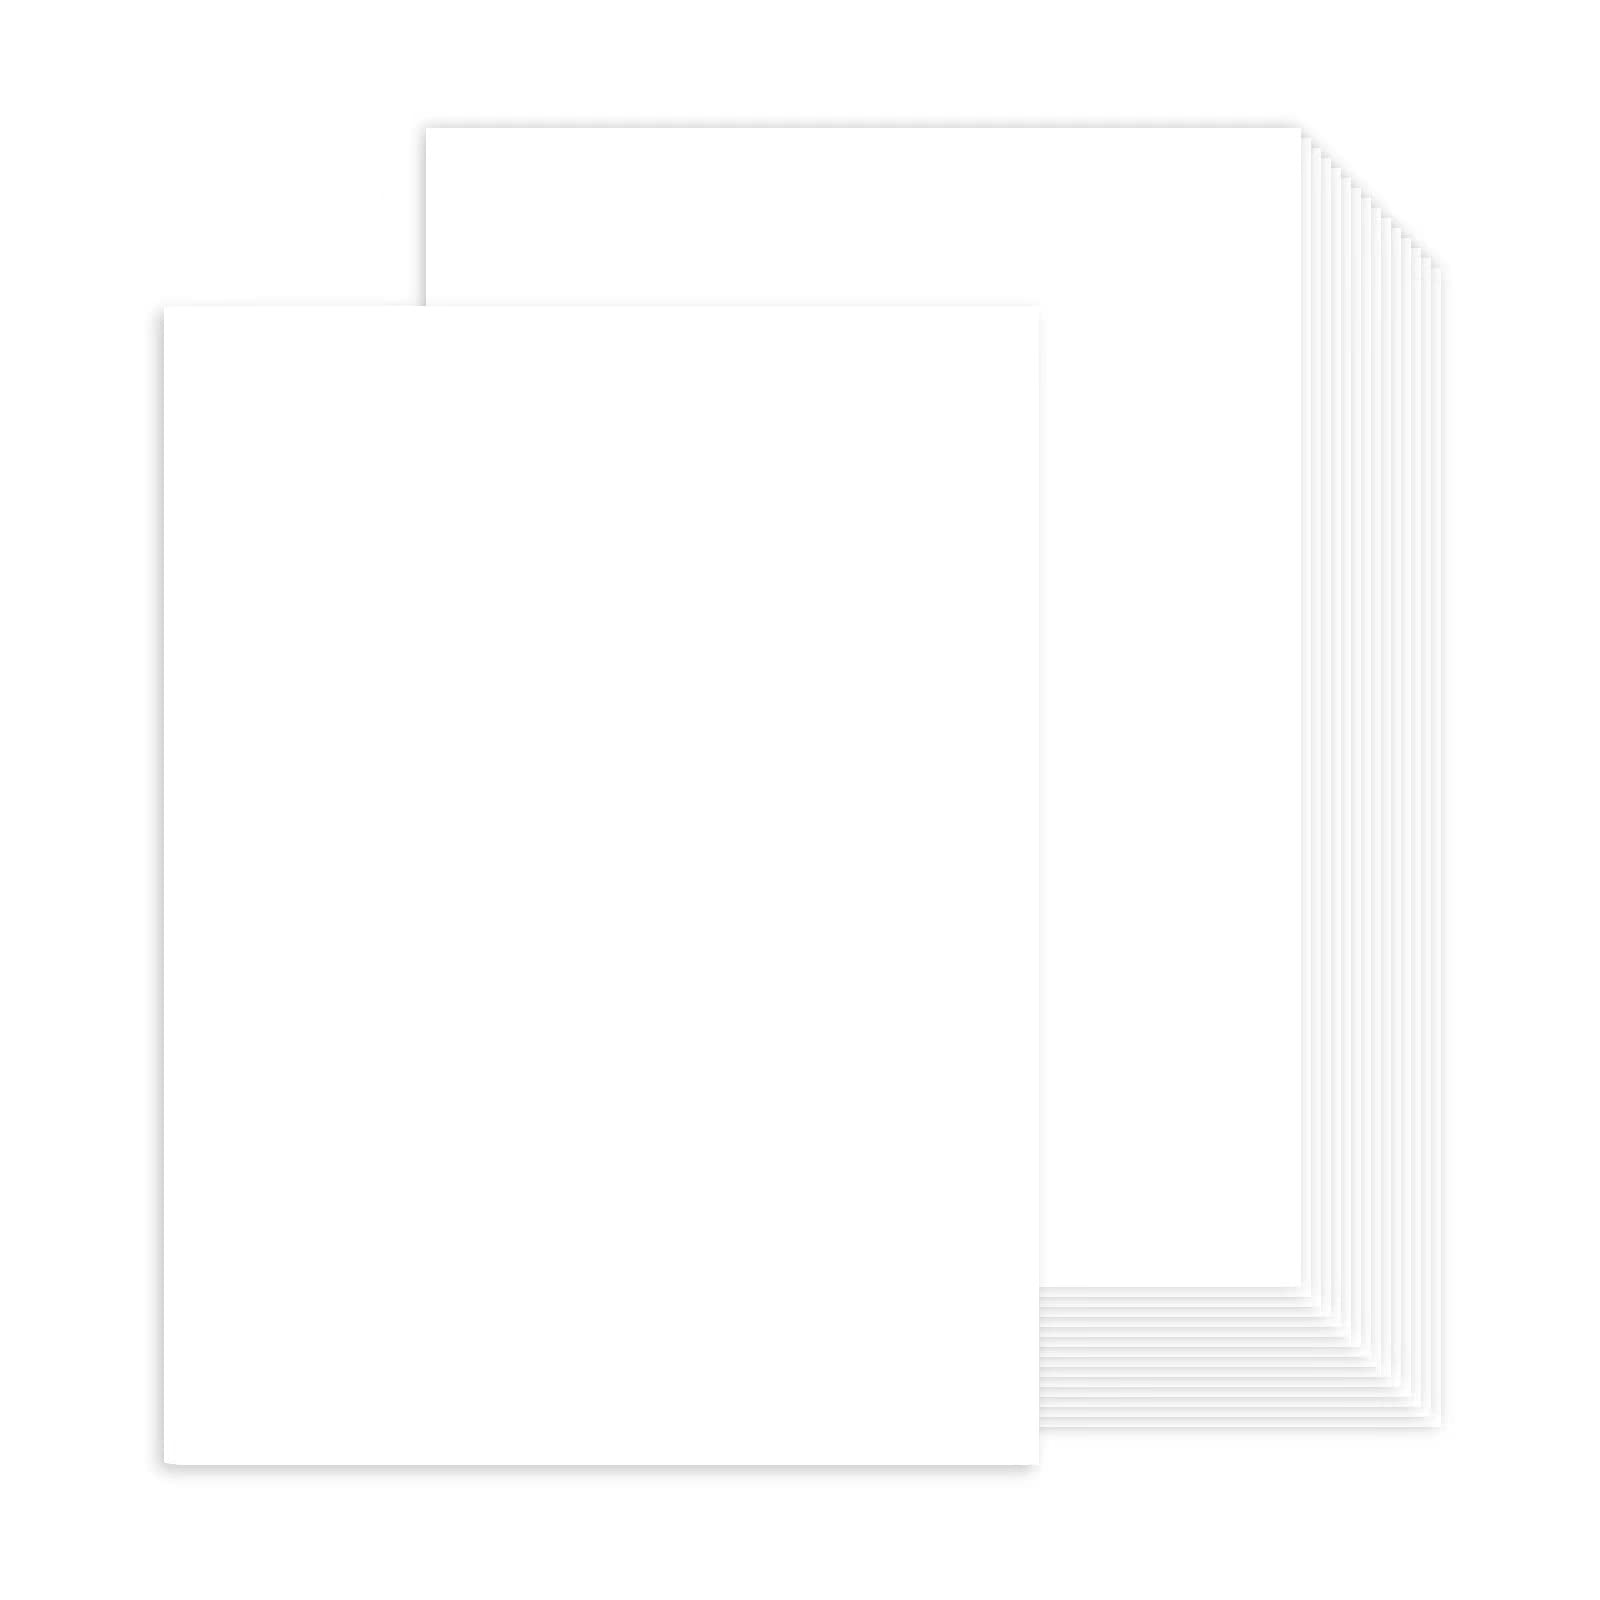 100 Sheets White Cardstock 8.5 x 11 Thick Paper Goefun 80lb Card Stock  Printer Paper for